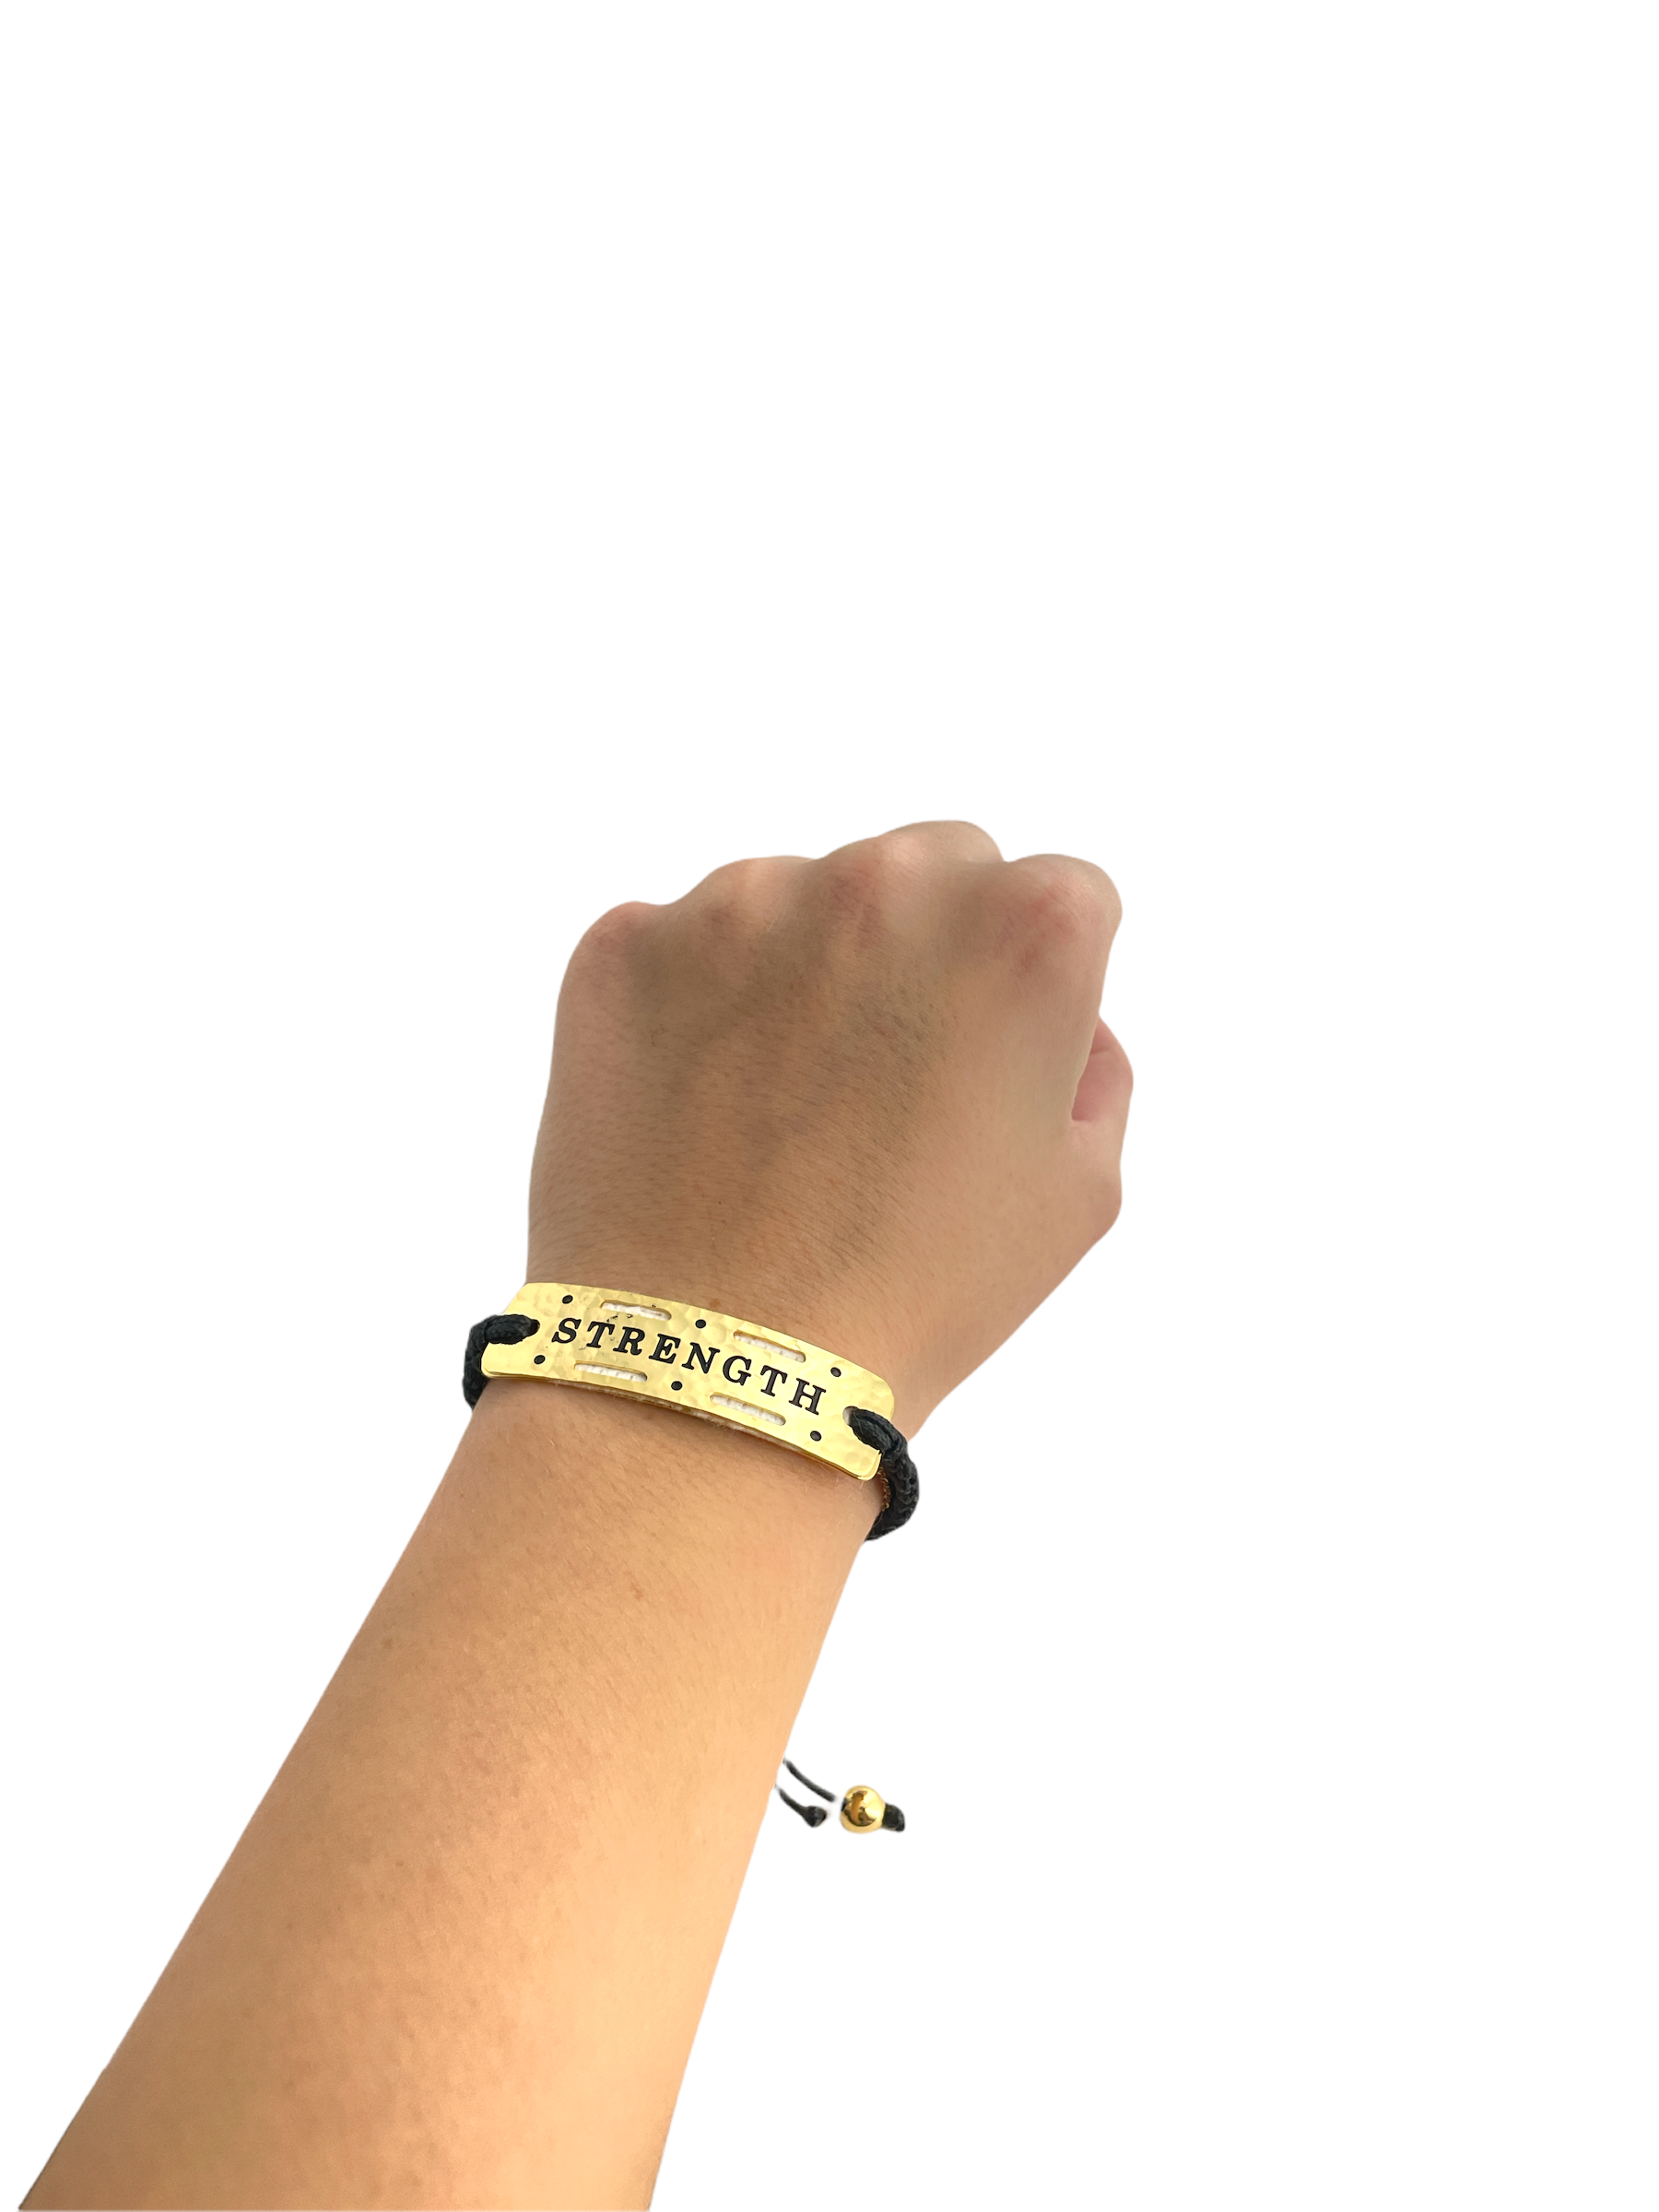 Strength - Vented In Brooklyn Power Word Aromatherapy Essential Oil Diffuser Bracelet